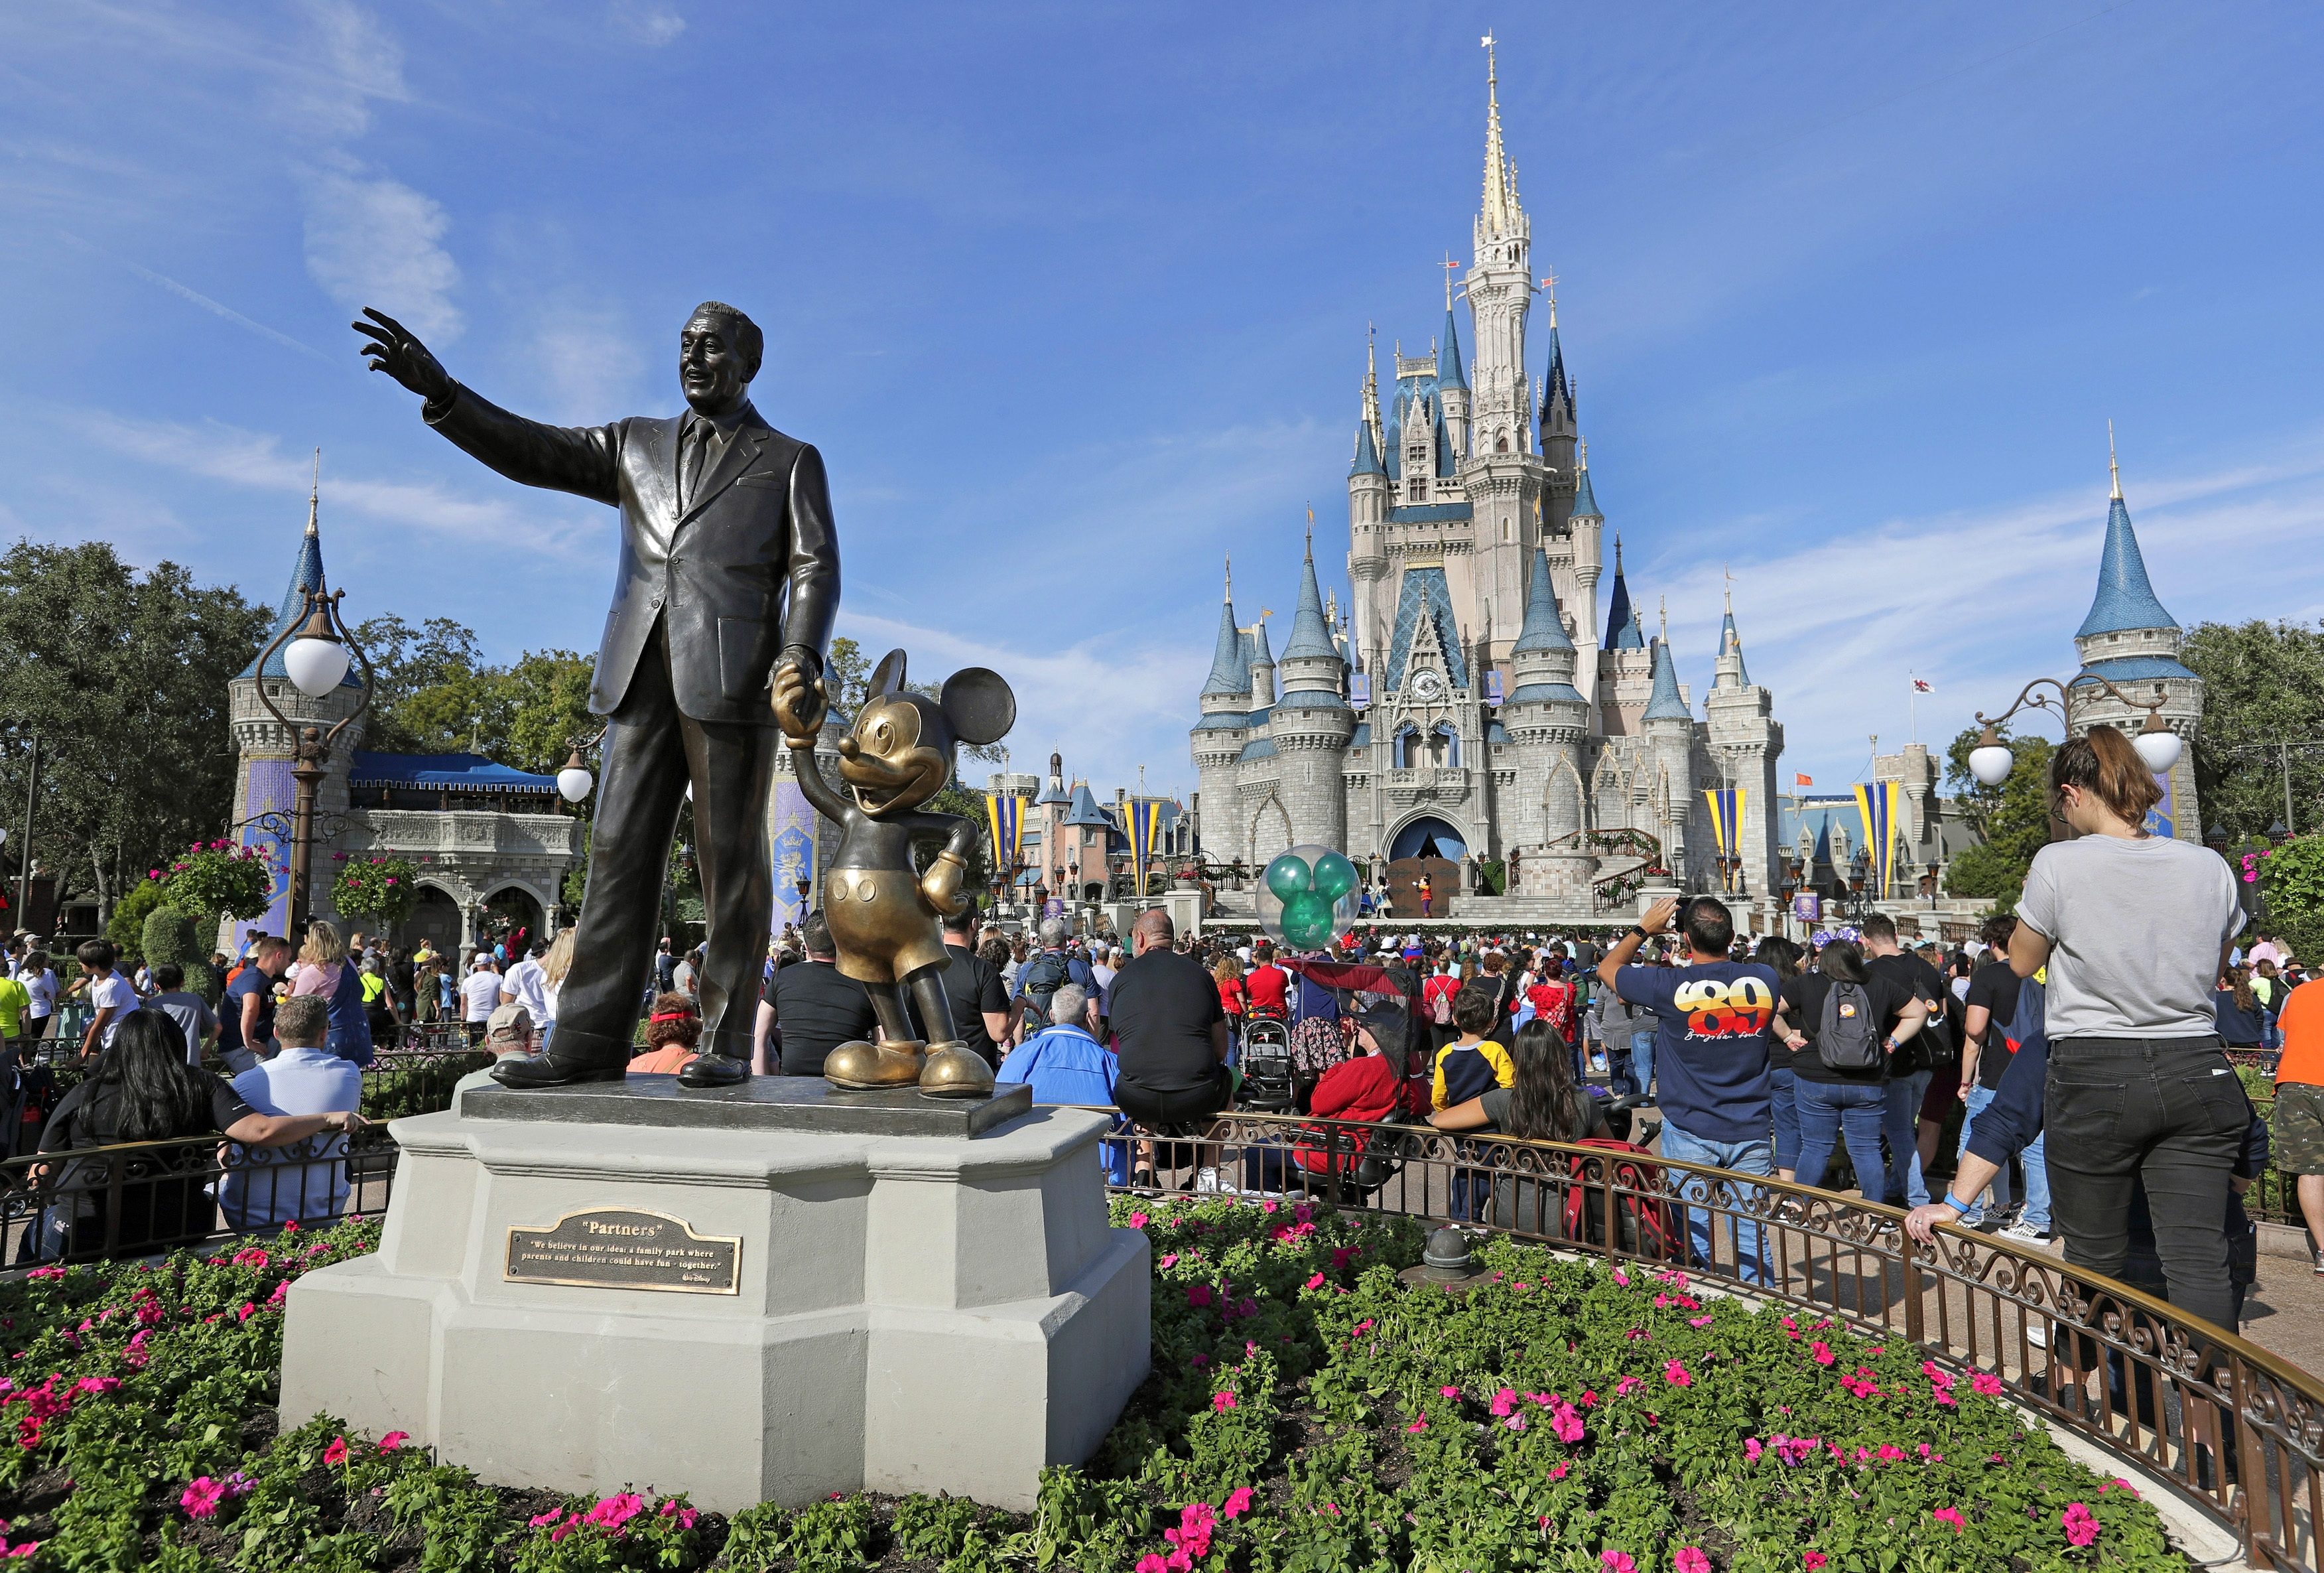 FILE - In this Jan. 9, 2019 photo, guests watch a show near a statue of Walt Disney and Micky Mouse in front of the Cinderella Castle at the Magic Kingdom at Walt Disney World in Lake Buena Vista, Fla. Disney. (John Raoux — AP)